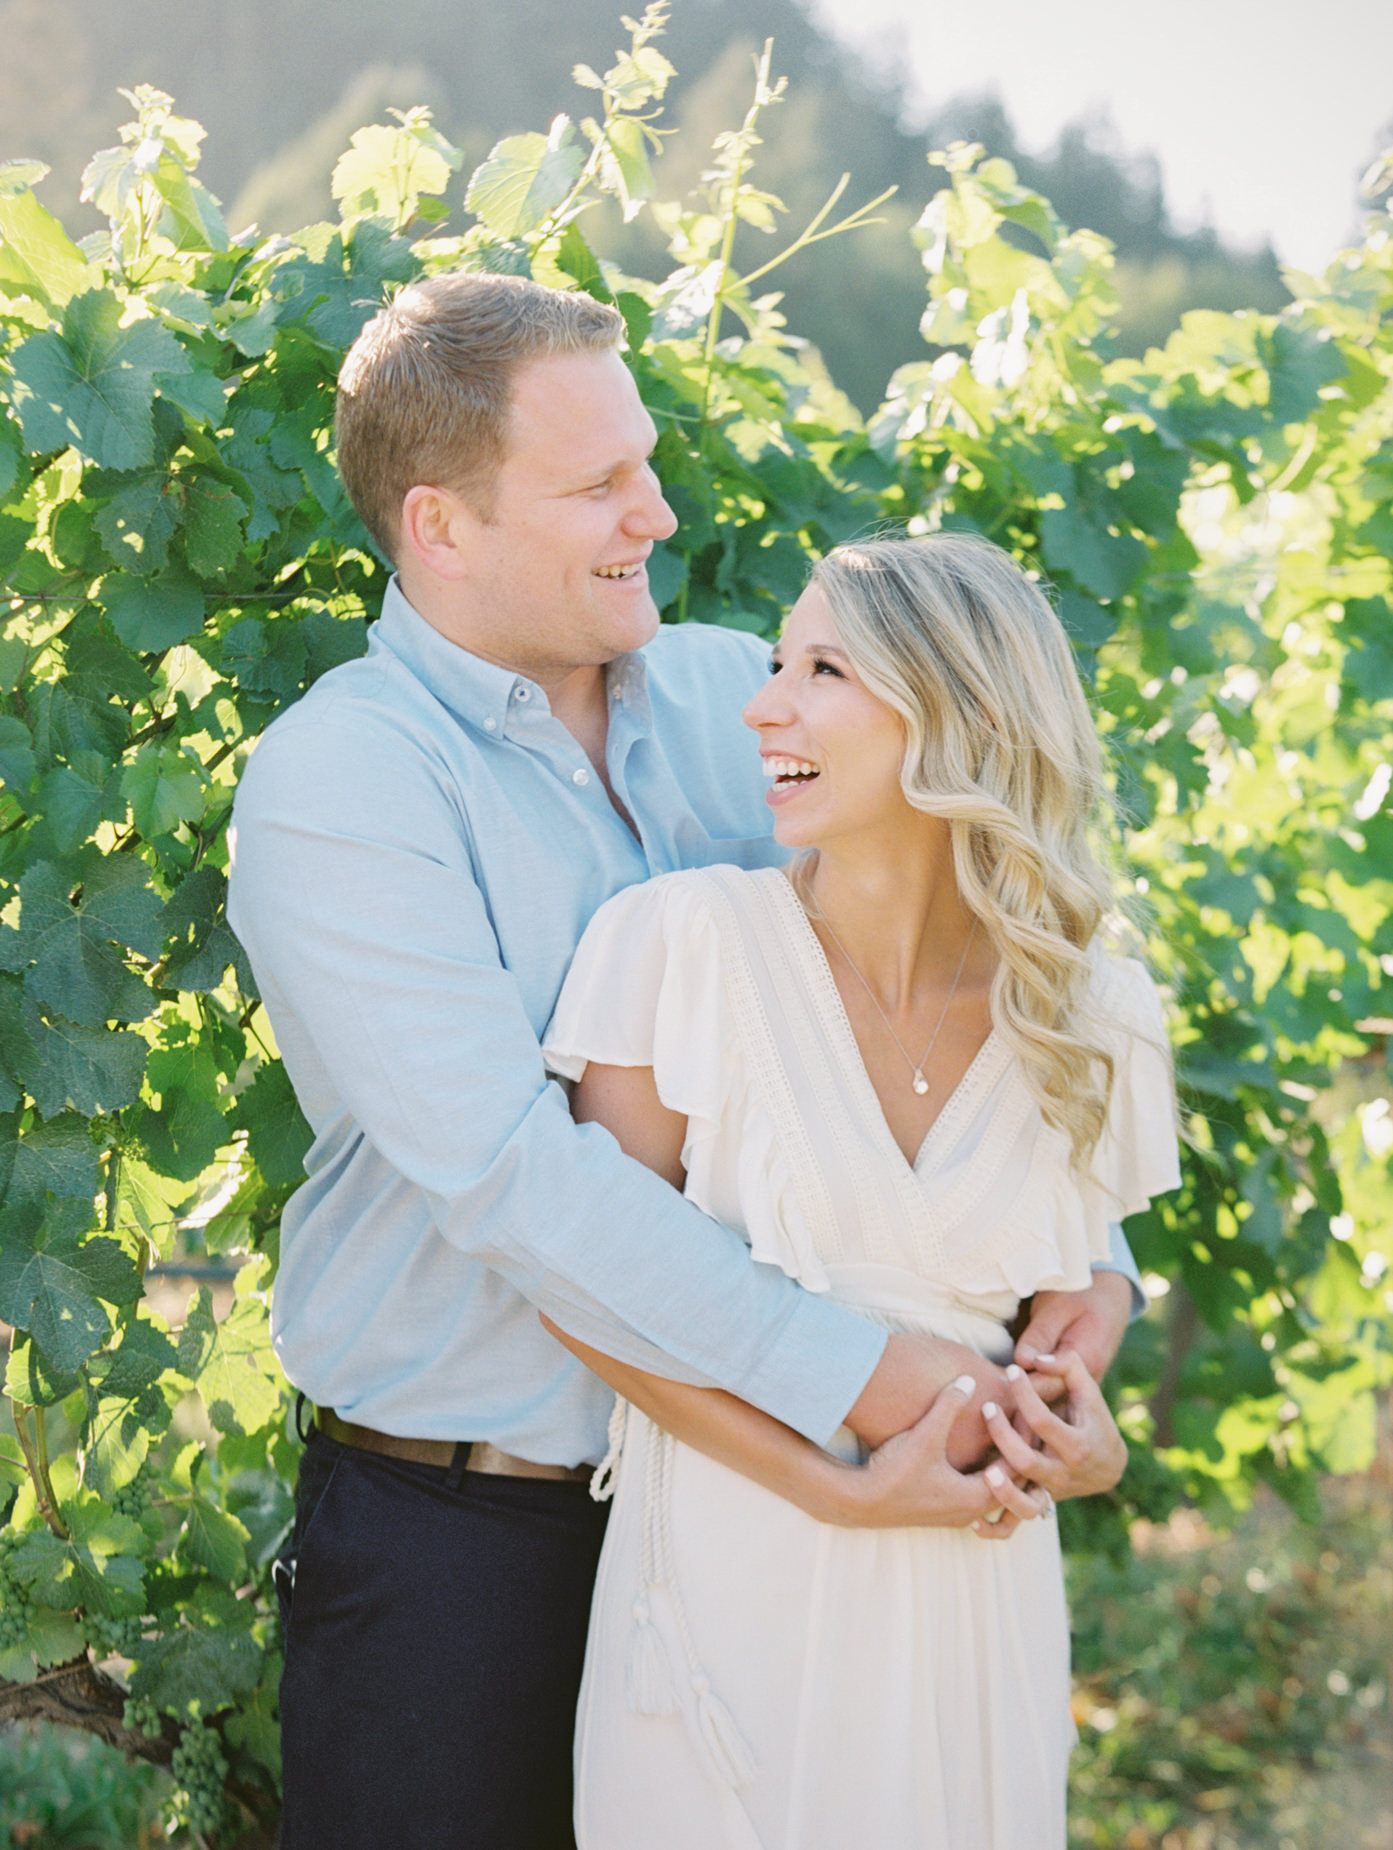 A fun engagement portrait during vineyard engagement at Williams Selyem Wines